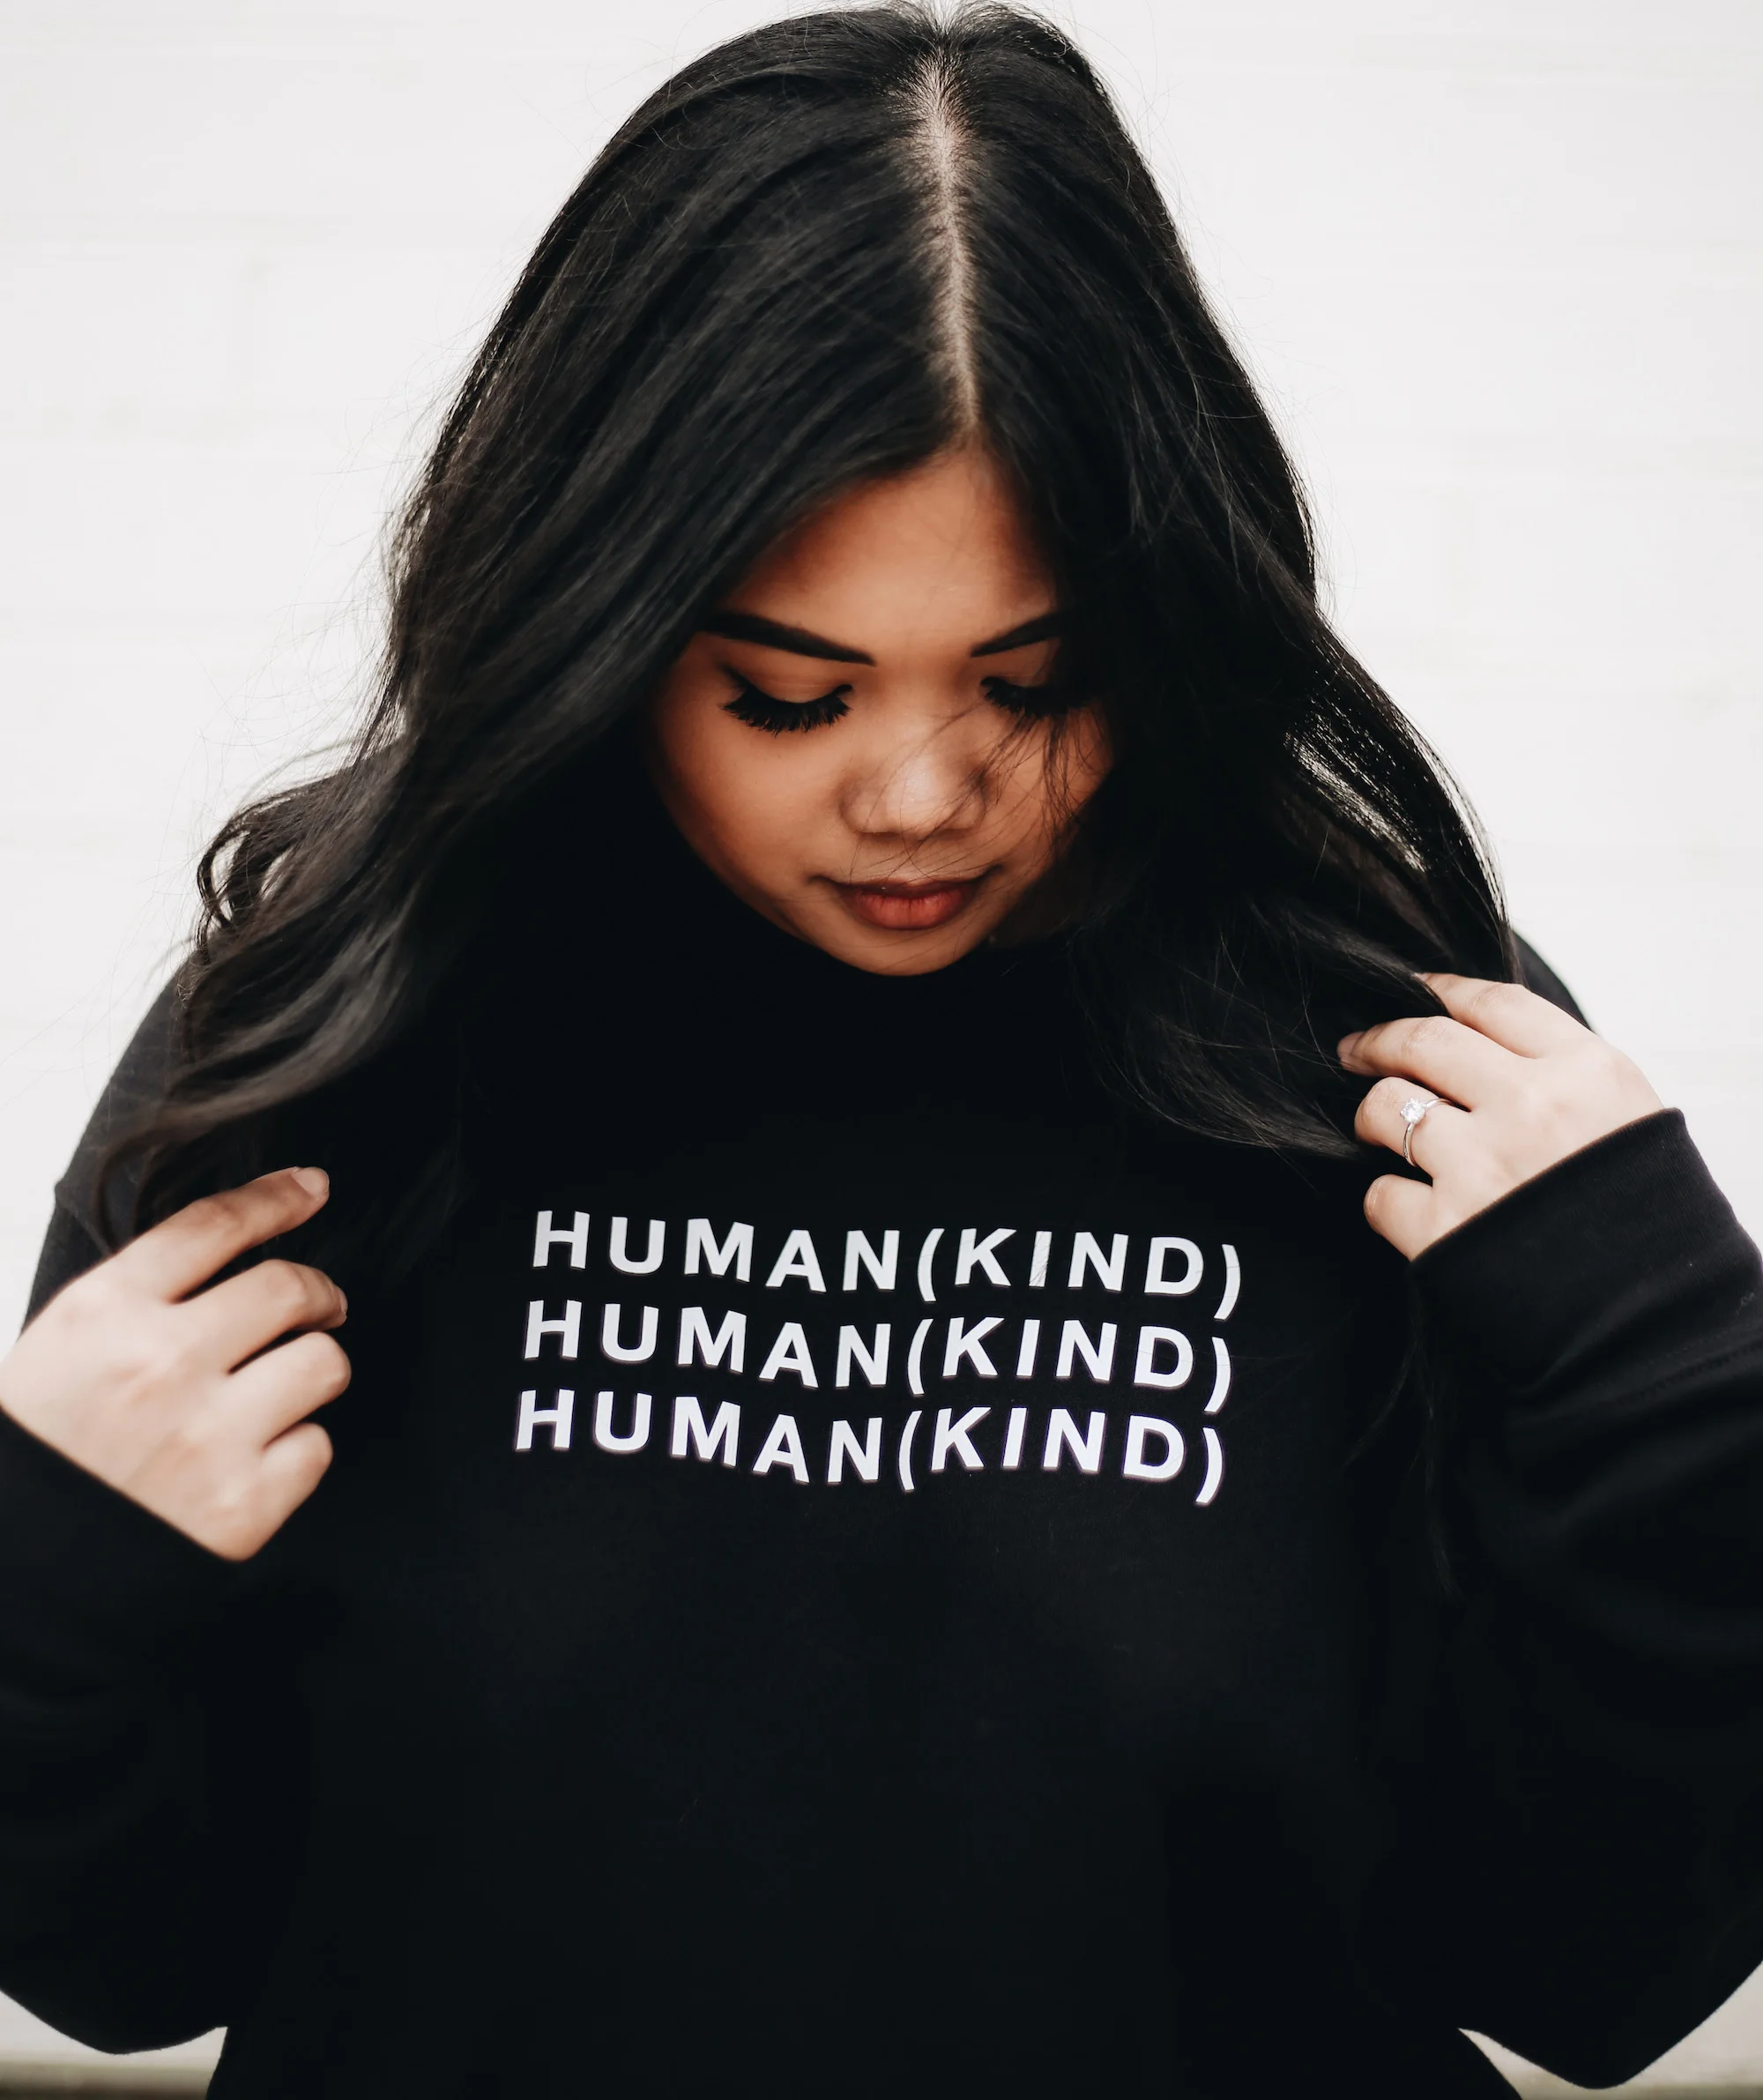 

Human kind women fashion unisex funny slogan young hipster pure cotton sweatshirt grunge tumblr pullovers quote vintage art tops